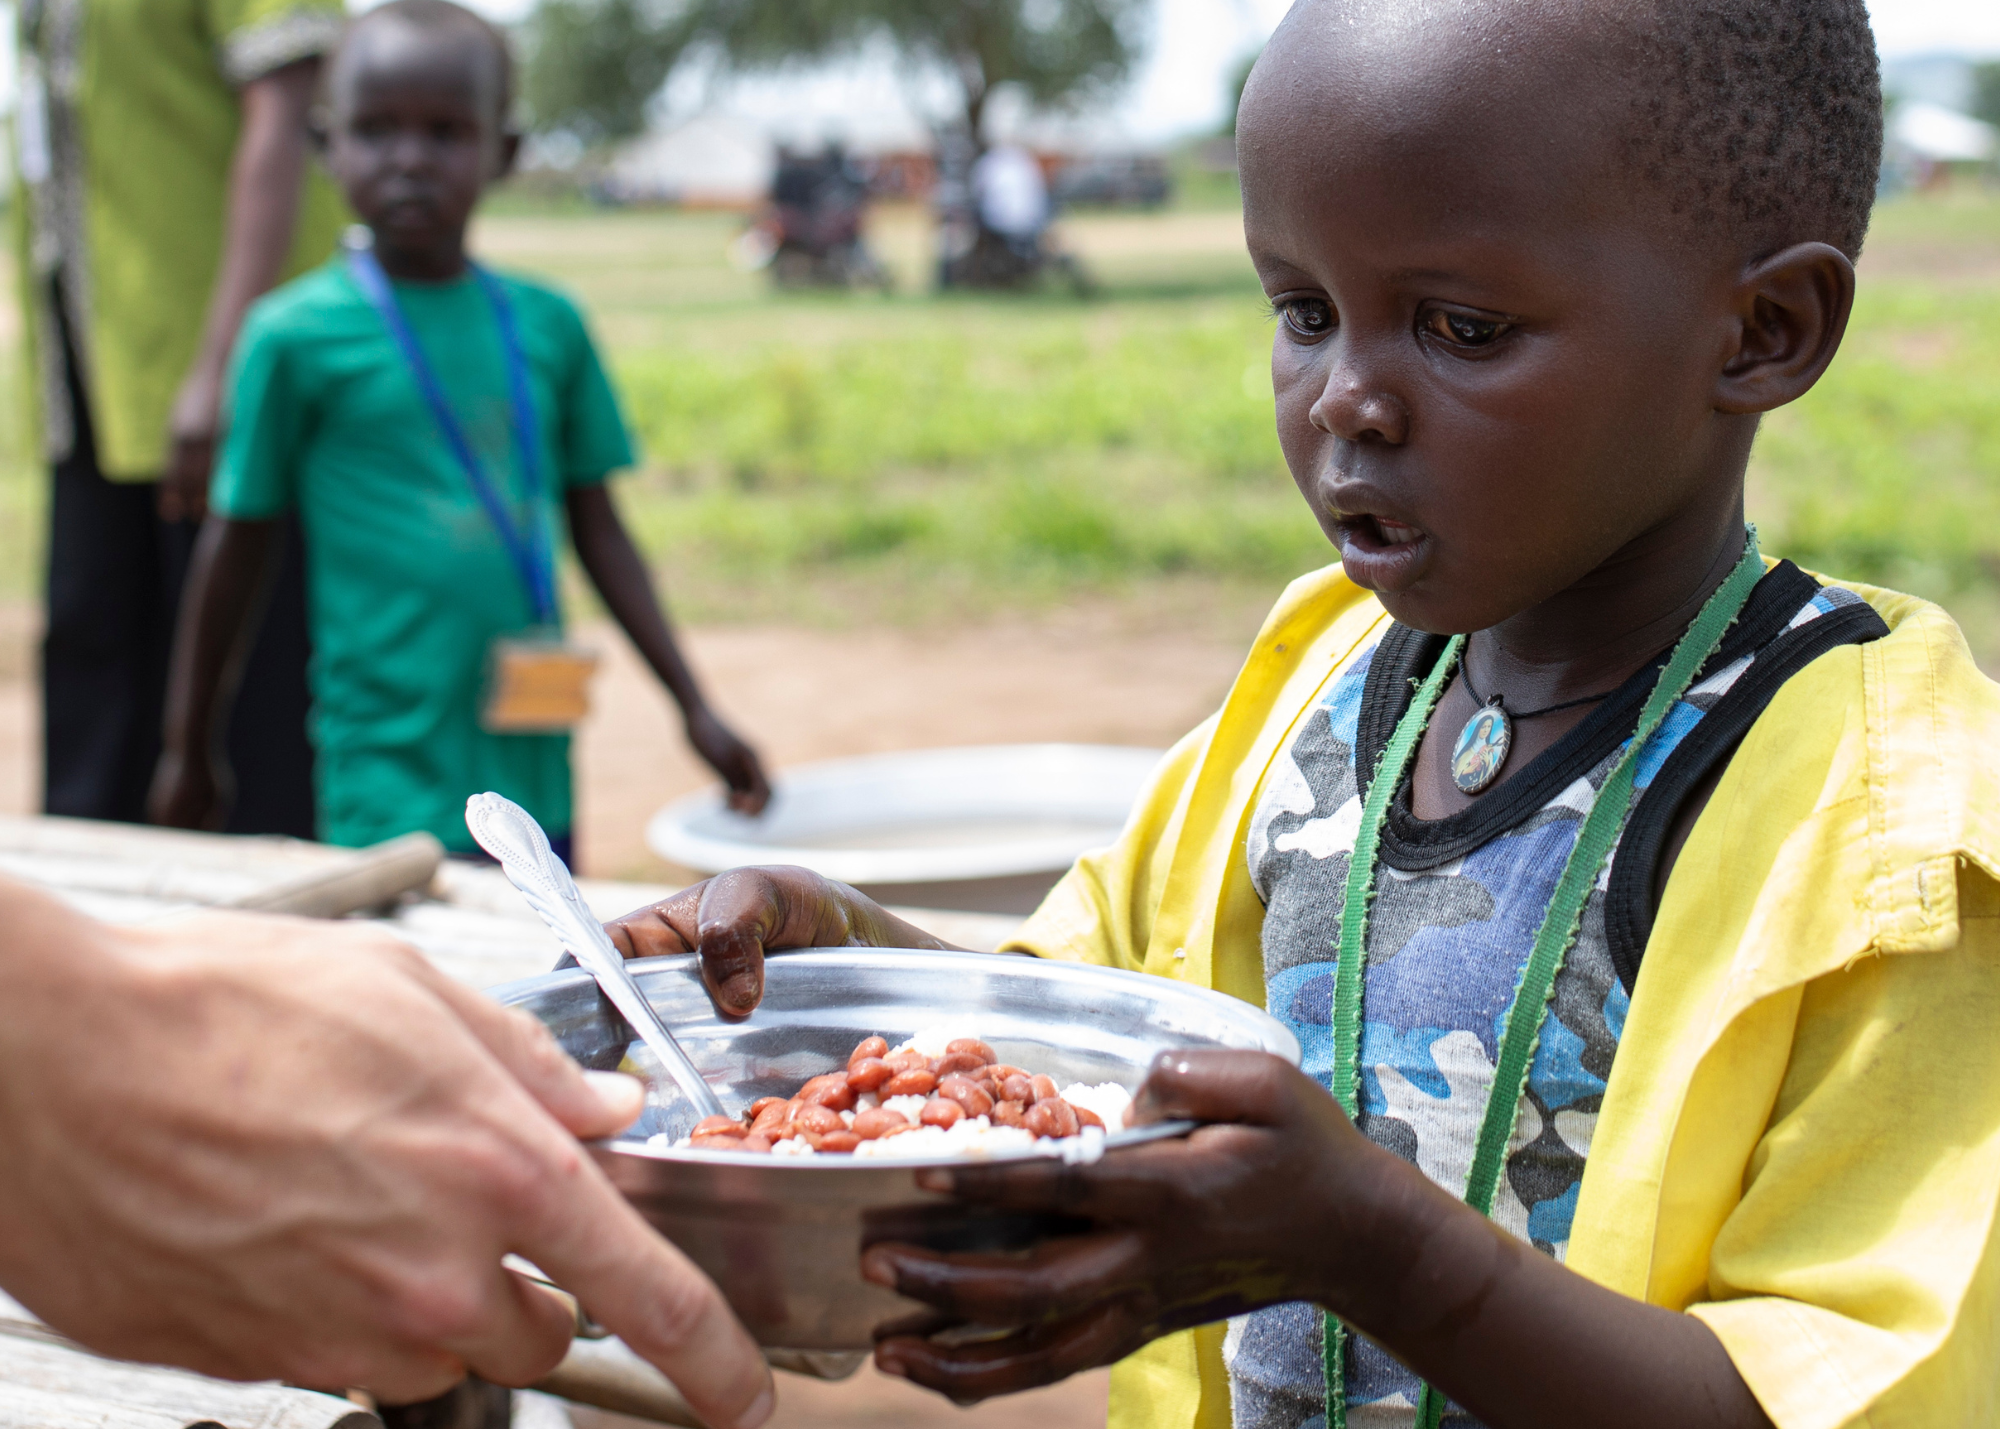 Hungry Children Are Fed in South Sudan Through Partnership